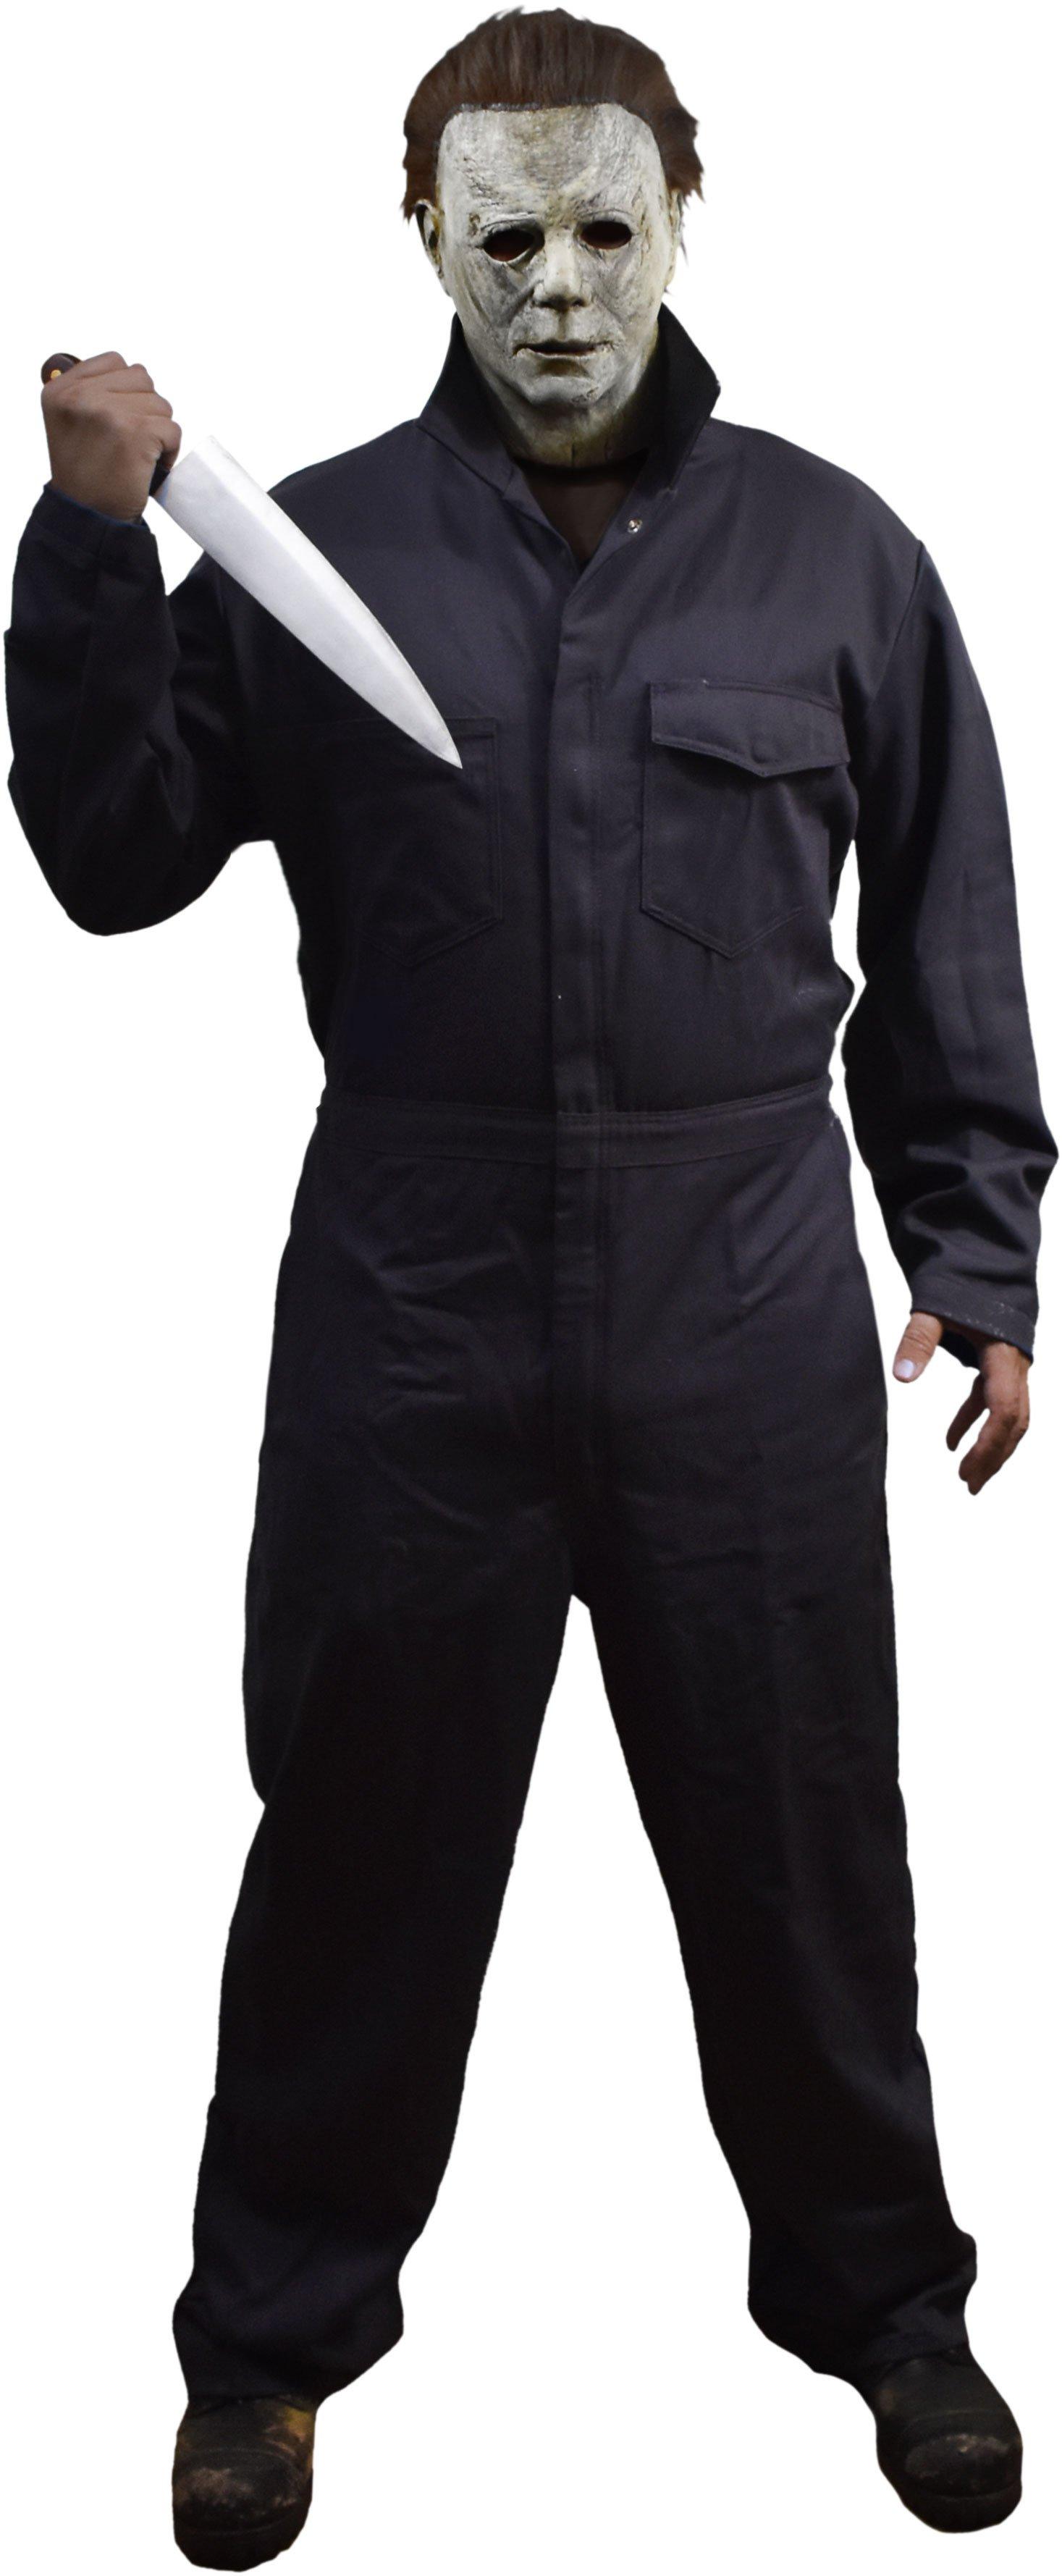 Micheal myers costume